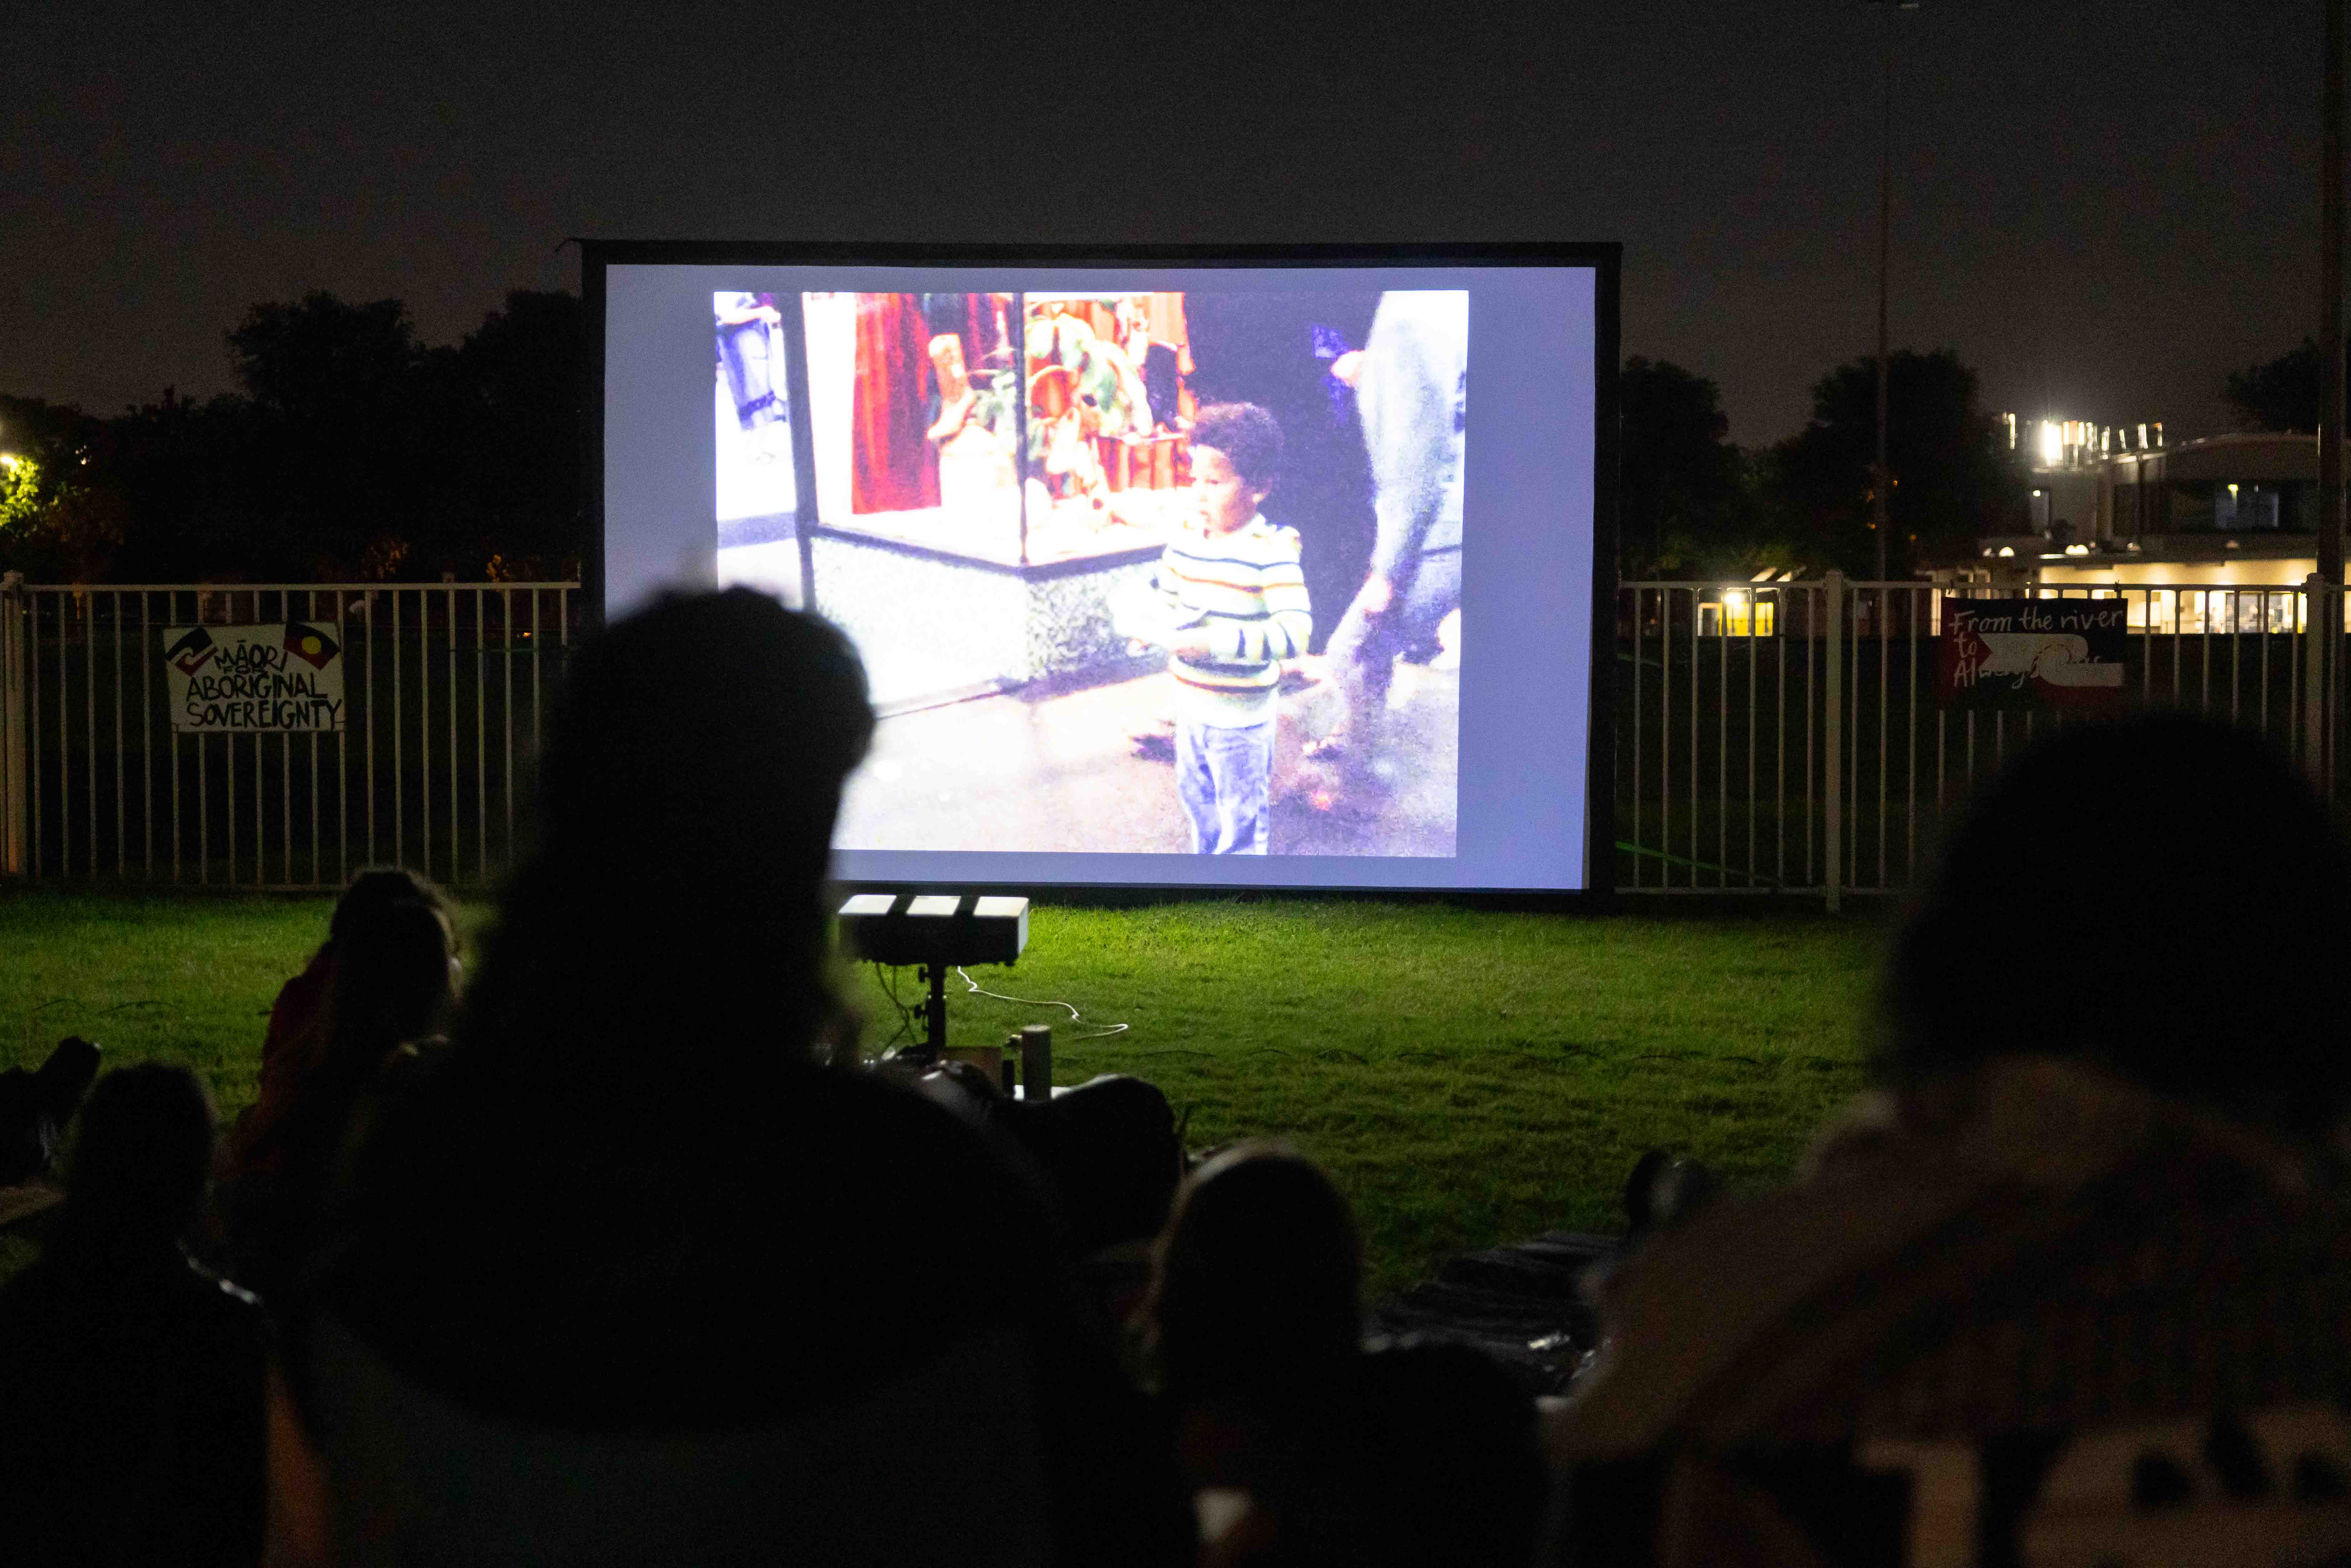 People watching an outdoor film on the grass.